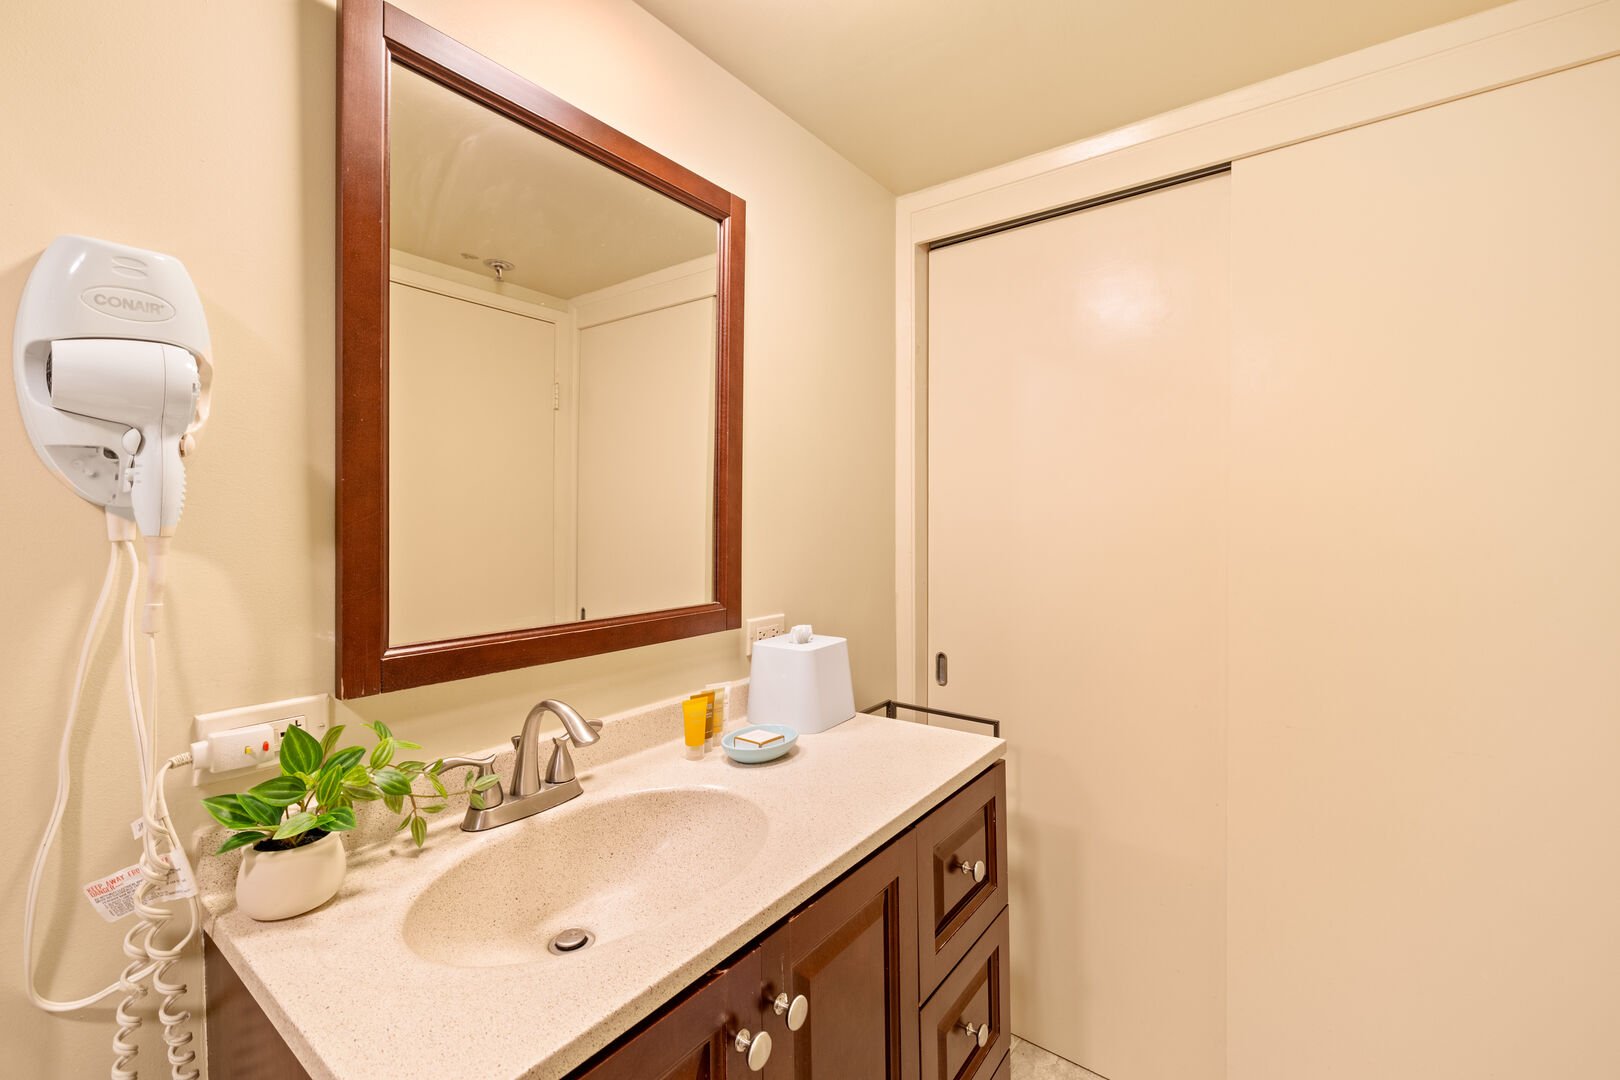 The bathroom has a vanity with a cabinet!